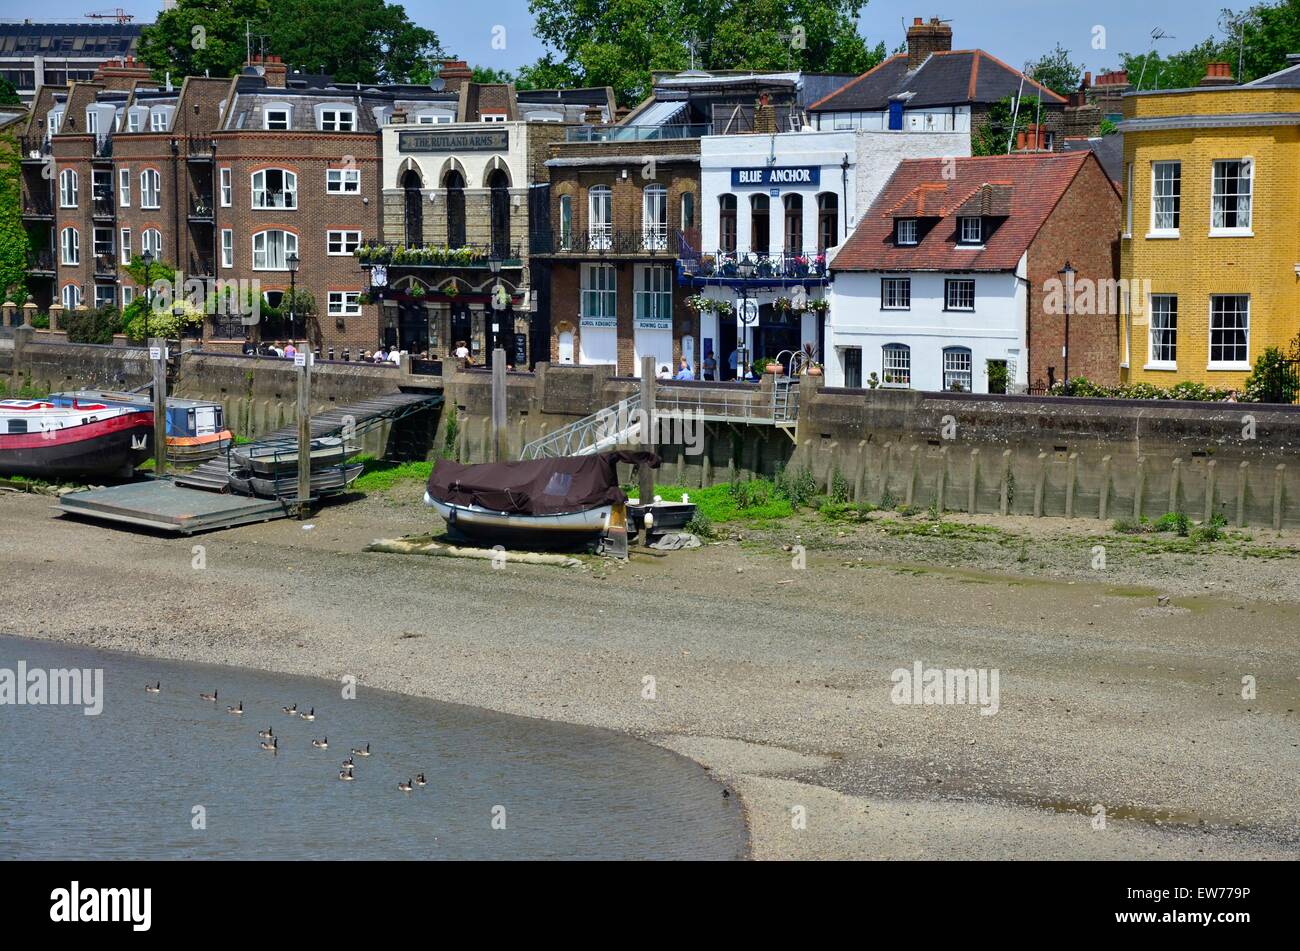 Lower Mall, Hammersmith, mit den Pubs The Blue Anchor und The Rutland Arms, London, England, UK Stockfoto